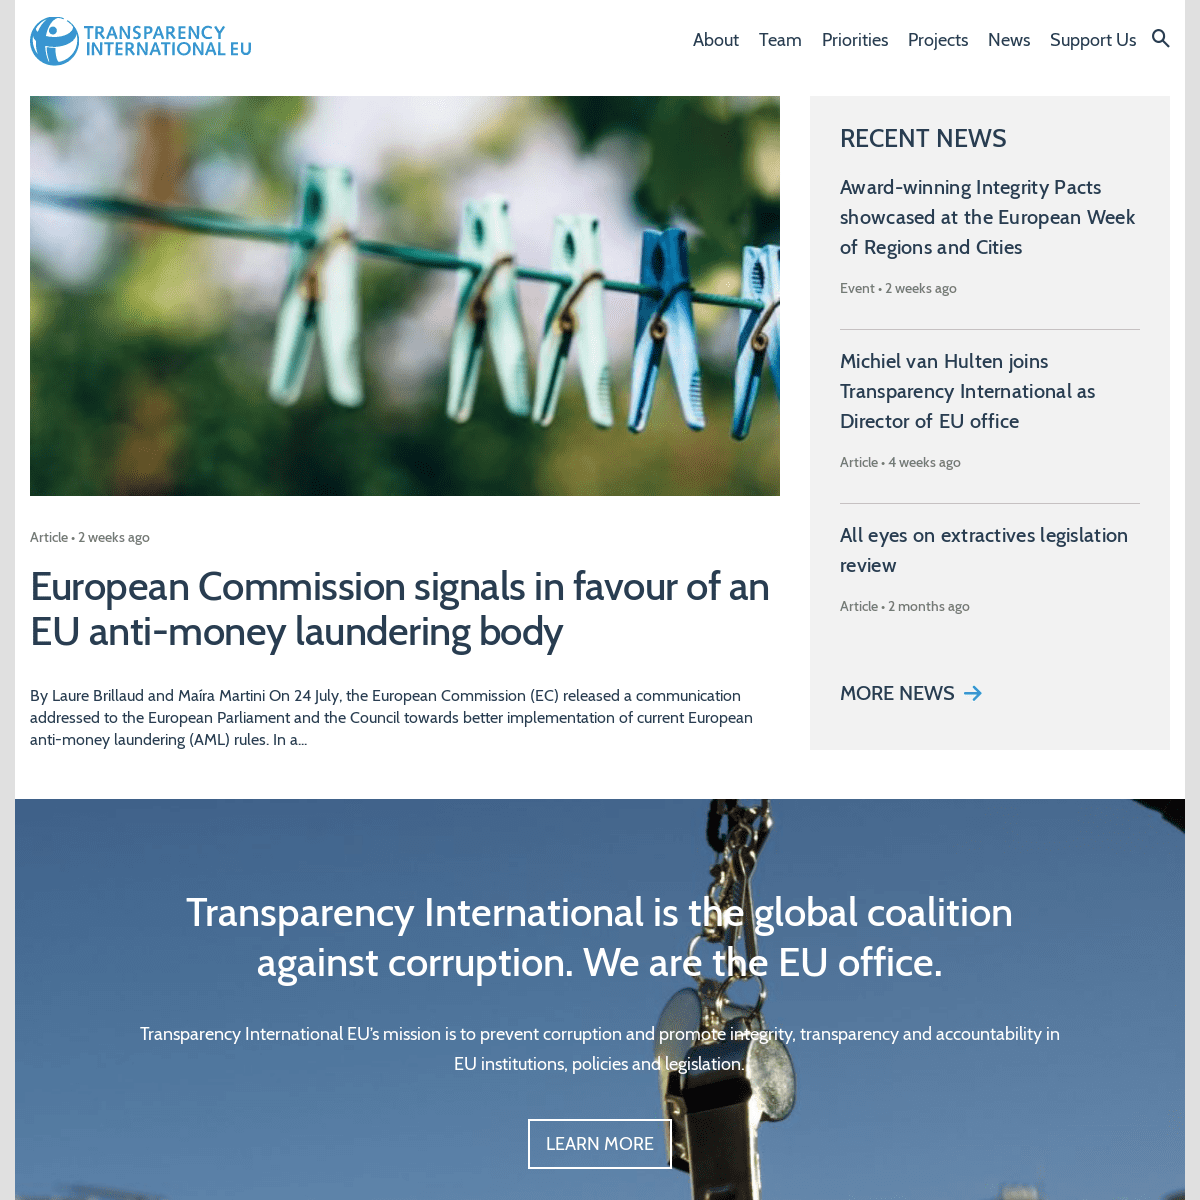 Transparency International EU - The global coalition against corruption in Brussels